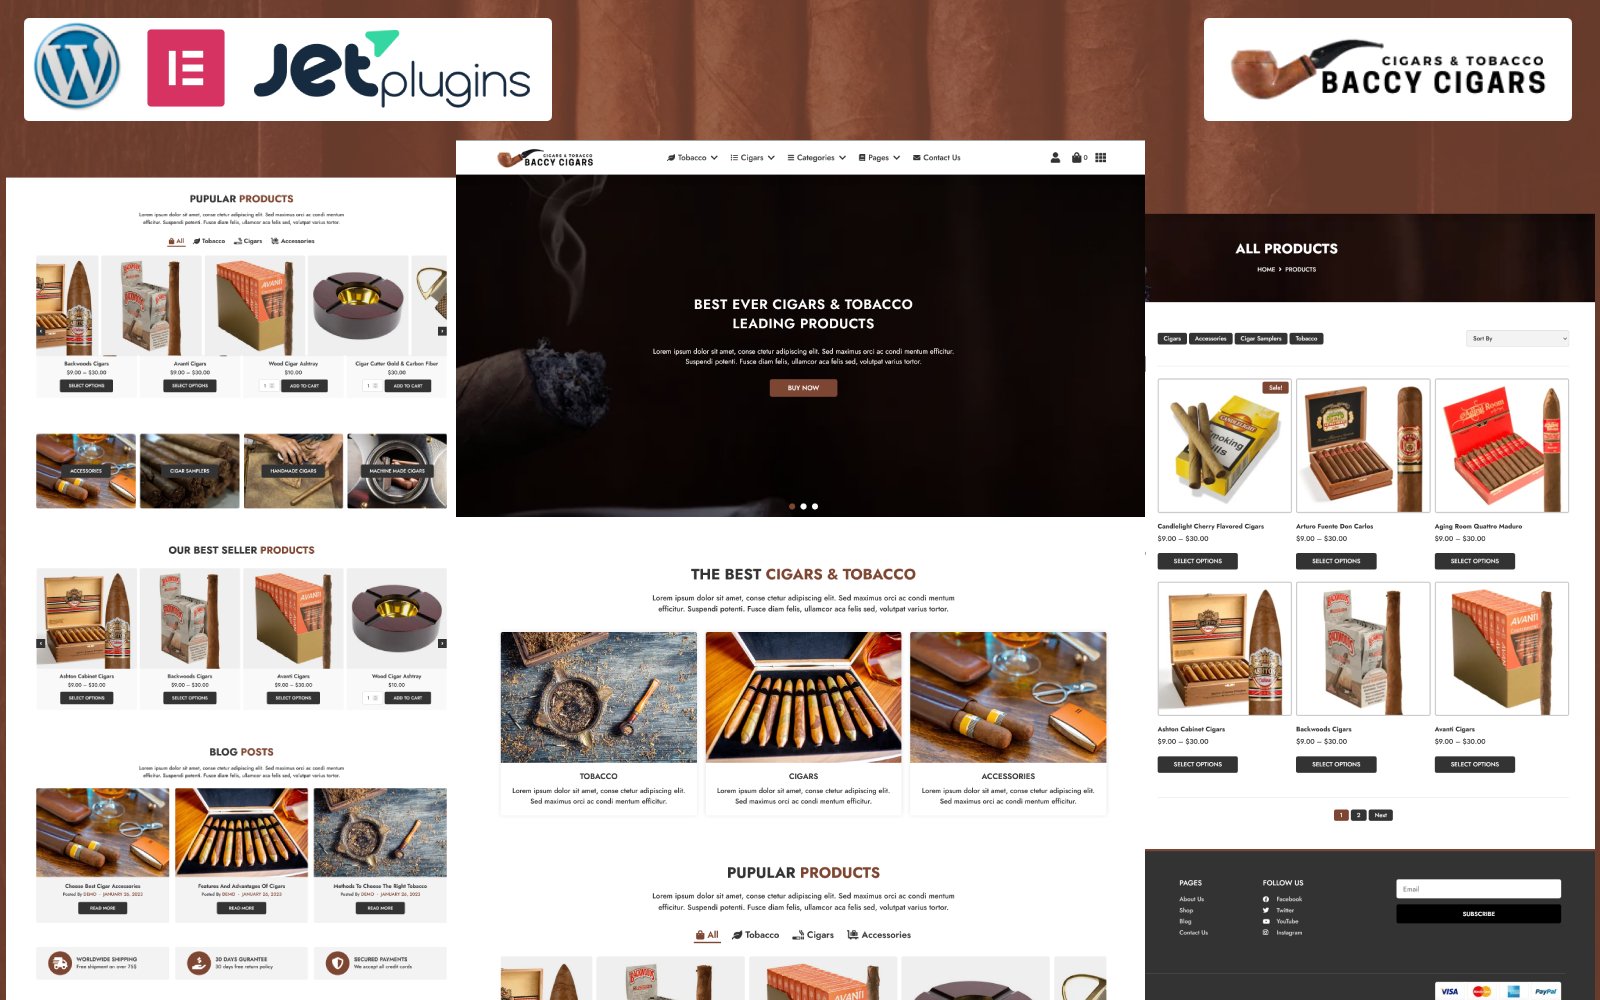 Baccy Cigars - Cigars & Tobacco WordPress Template